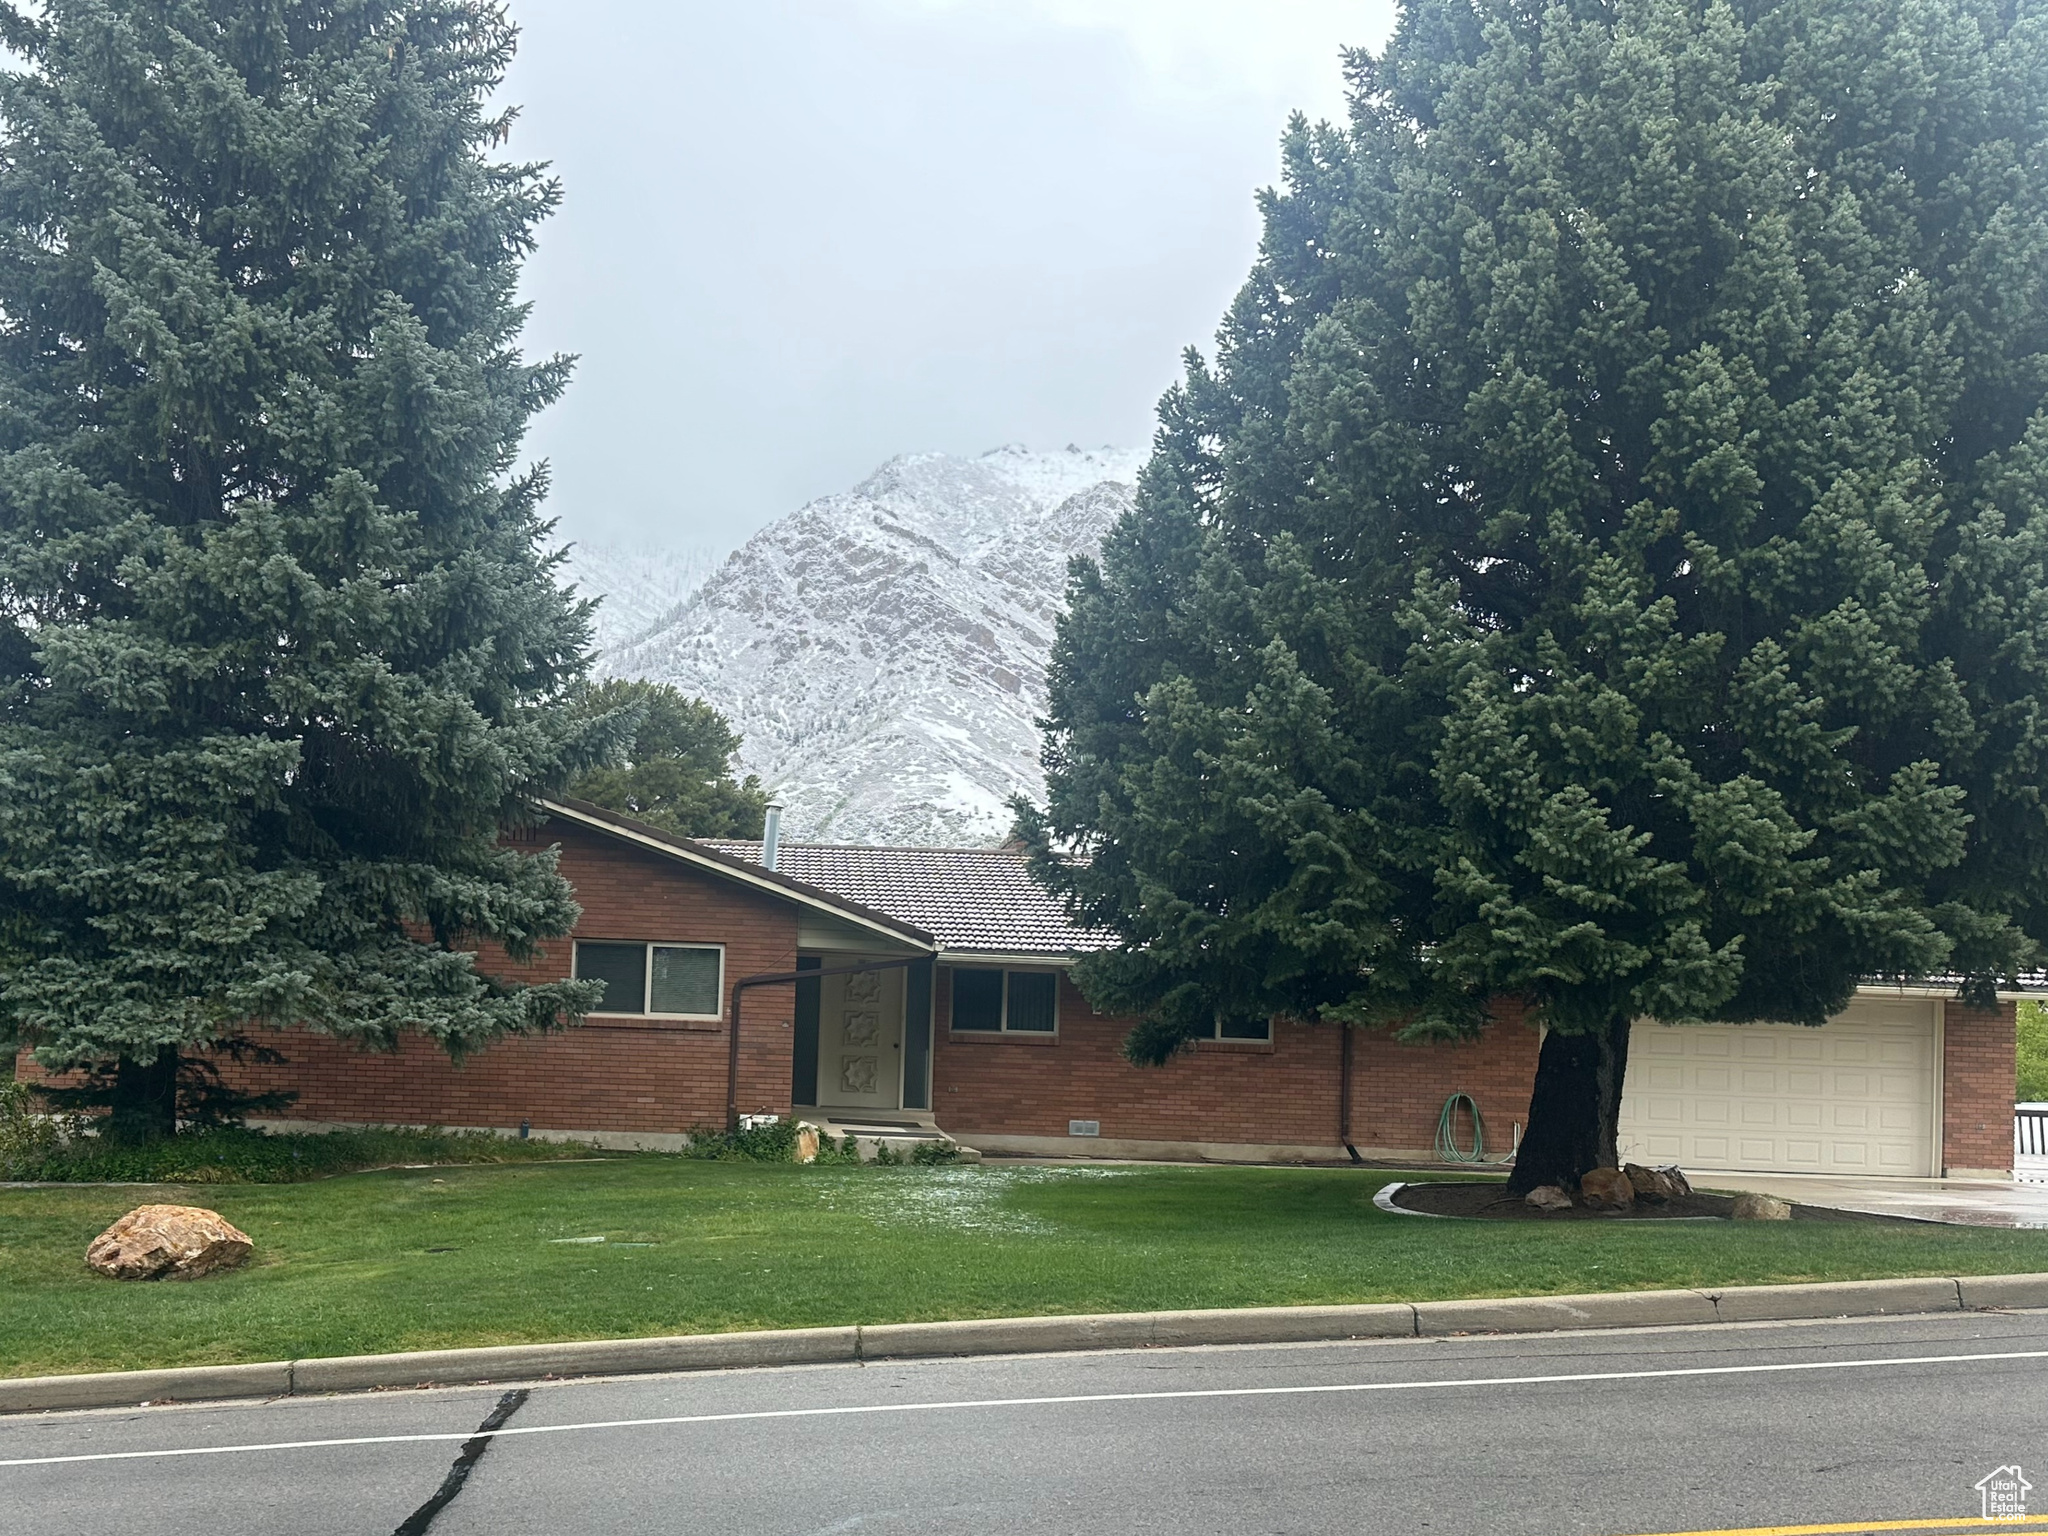 View of front, with fantastic mountain view, large garage, mature landscaping.